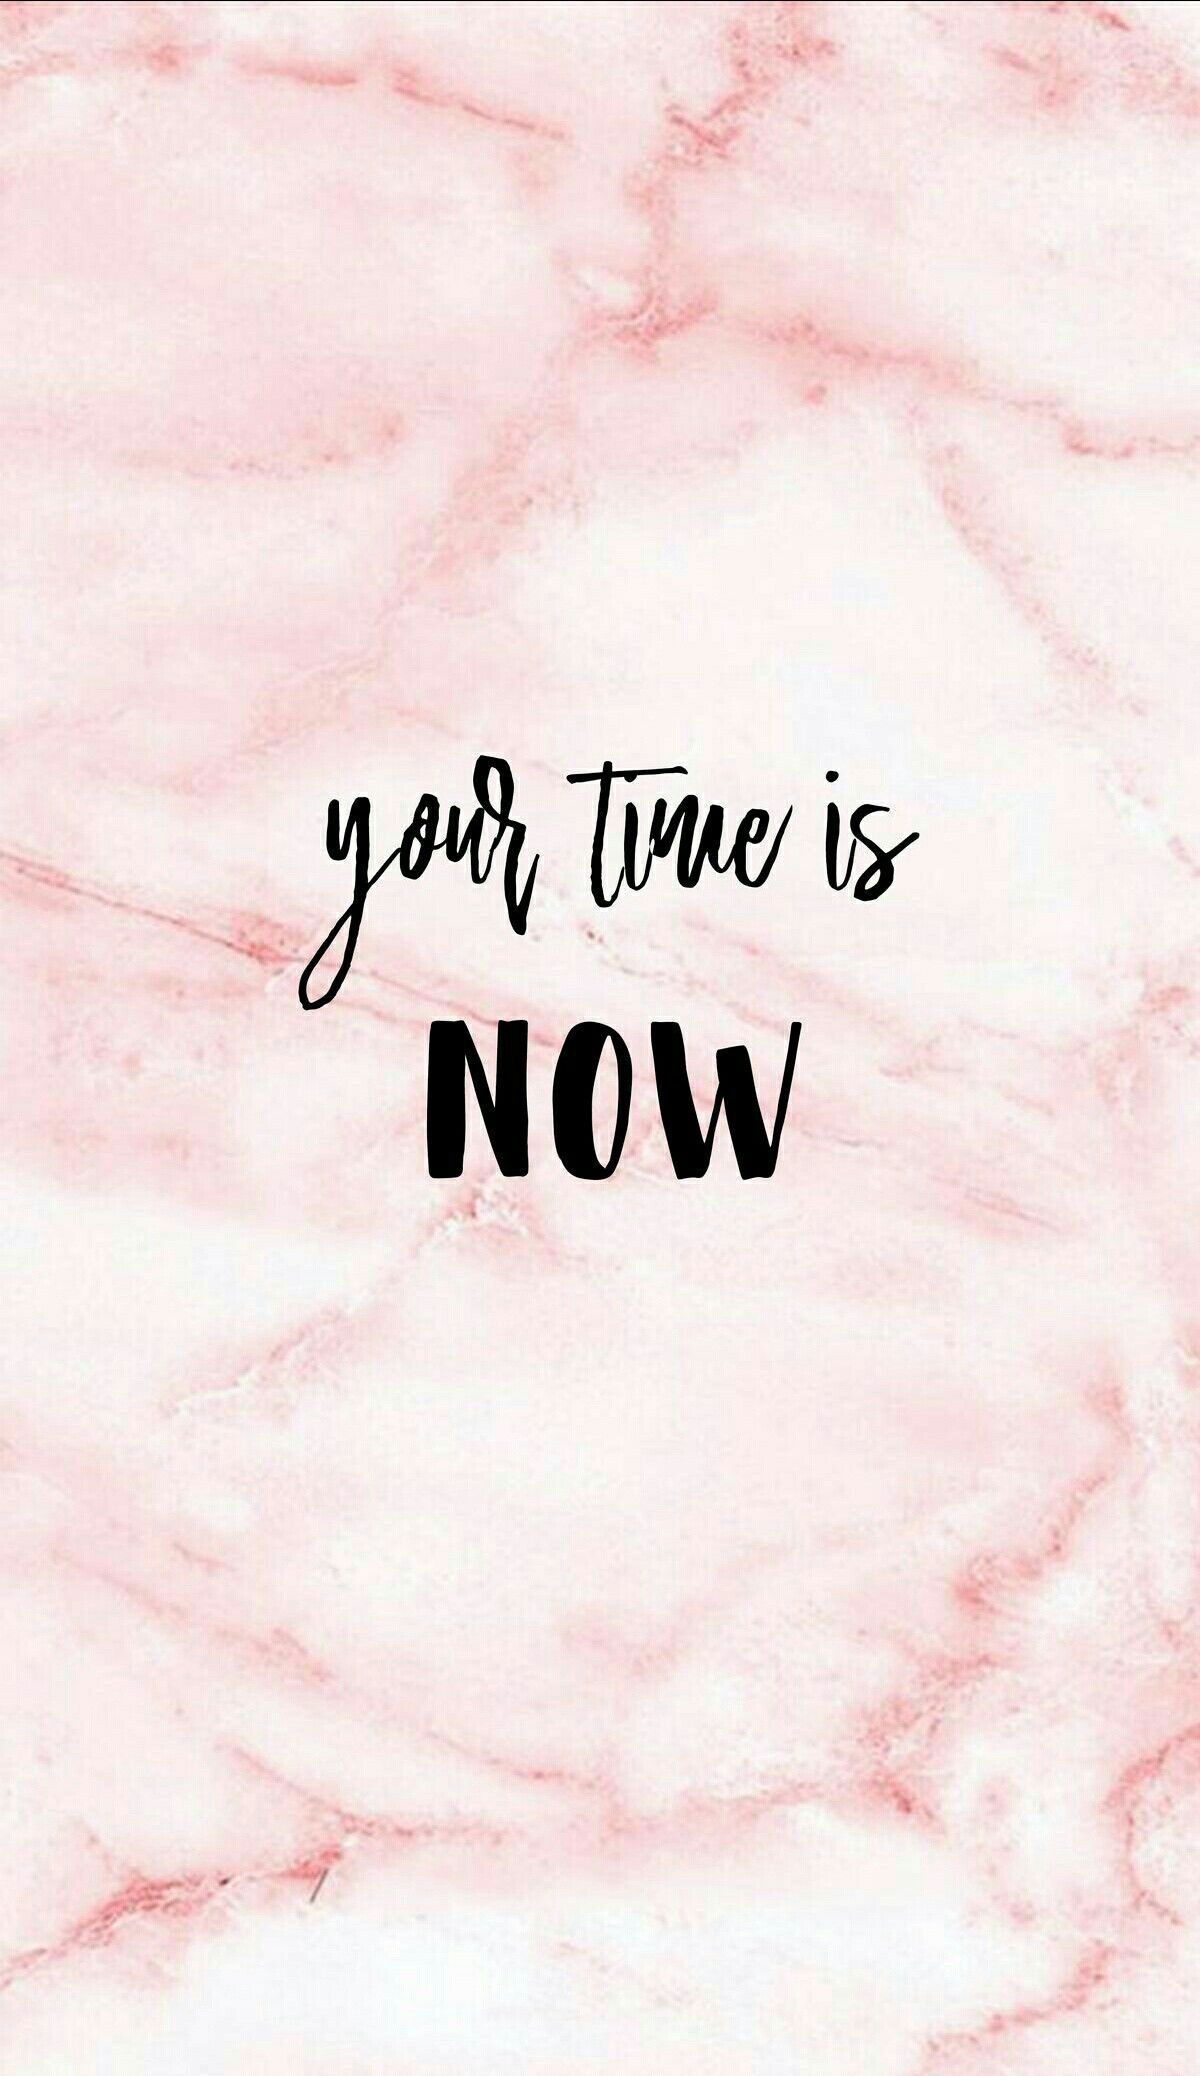 Your time is NOW!! Encouraging quote Wallpaper. Wallpaper quotes, Inspirational quotes, Cute wallpaper